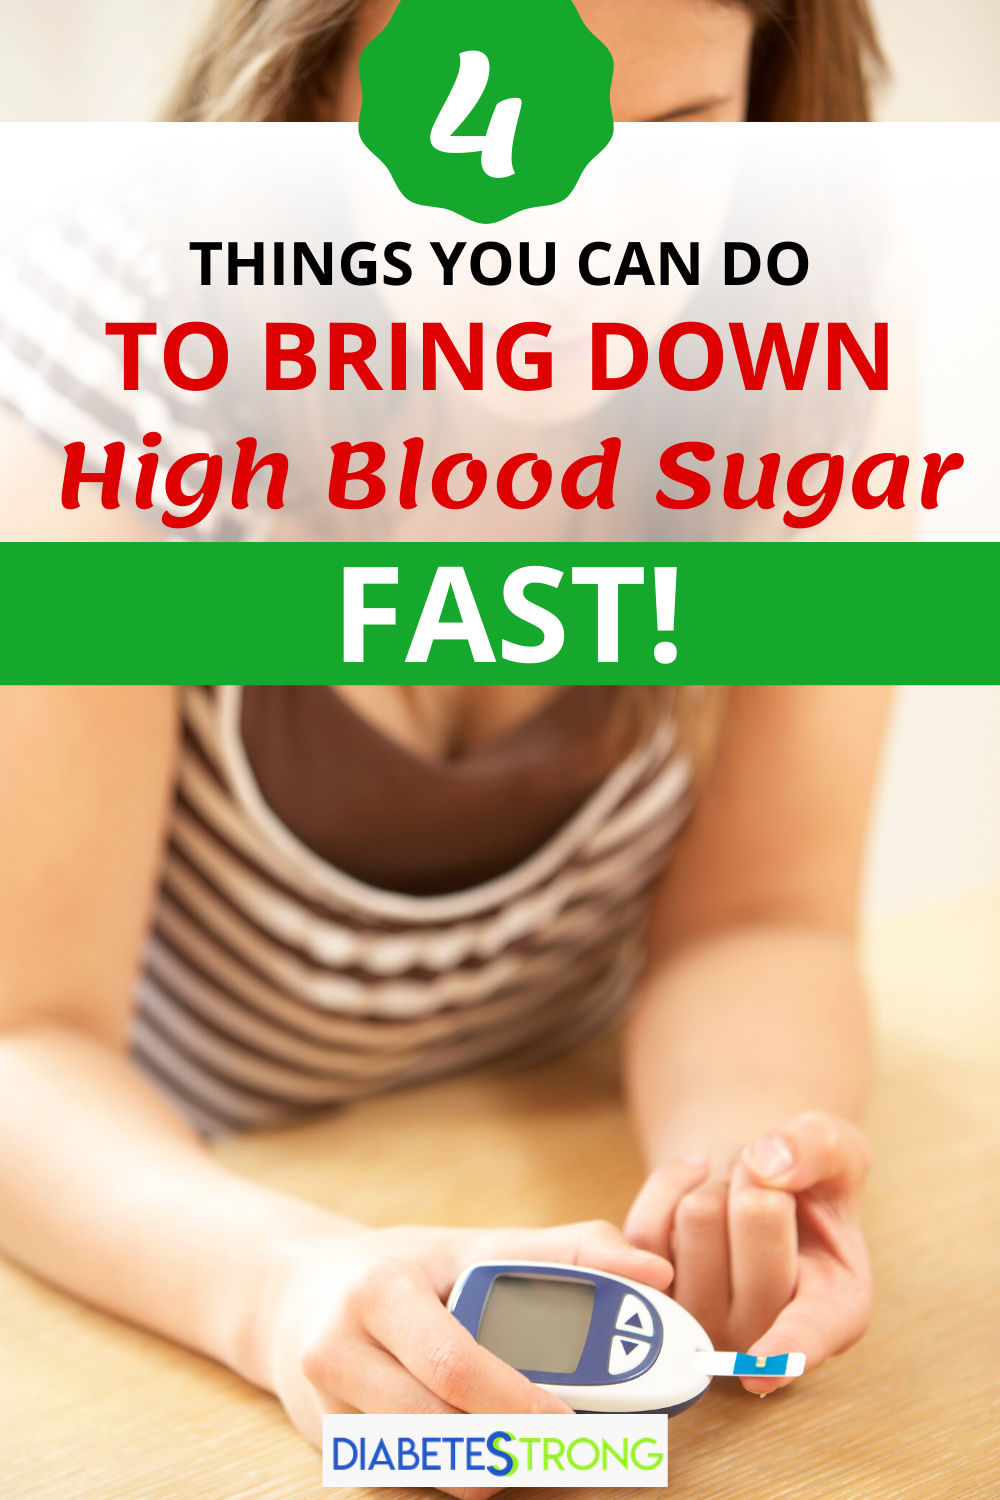 How To Bring Down High Blood Sugar Fast